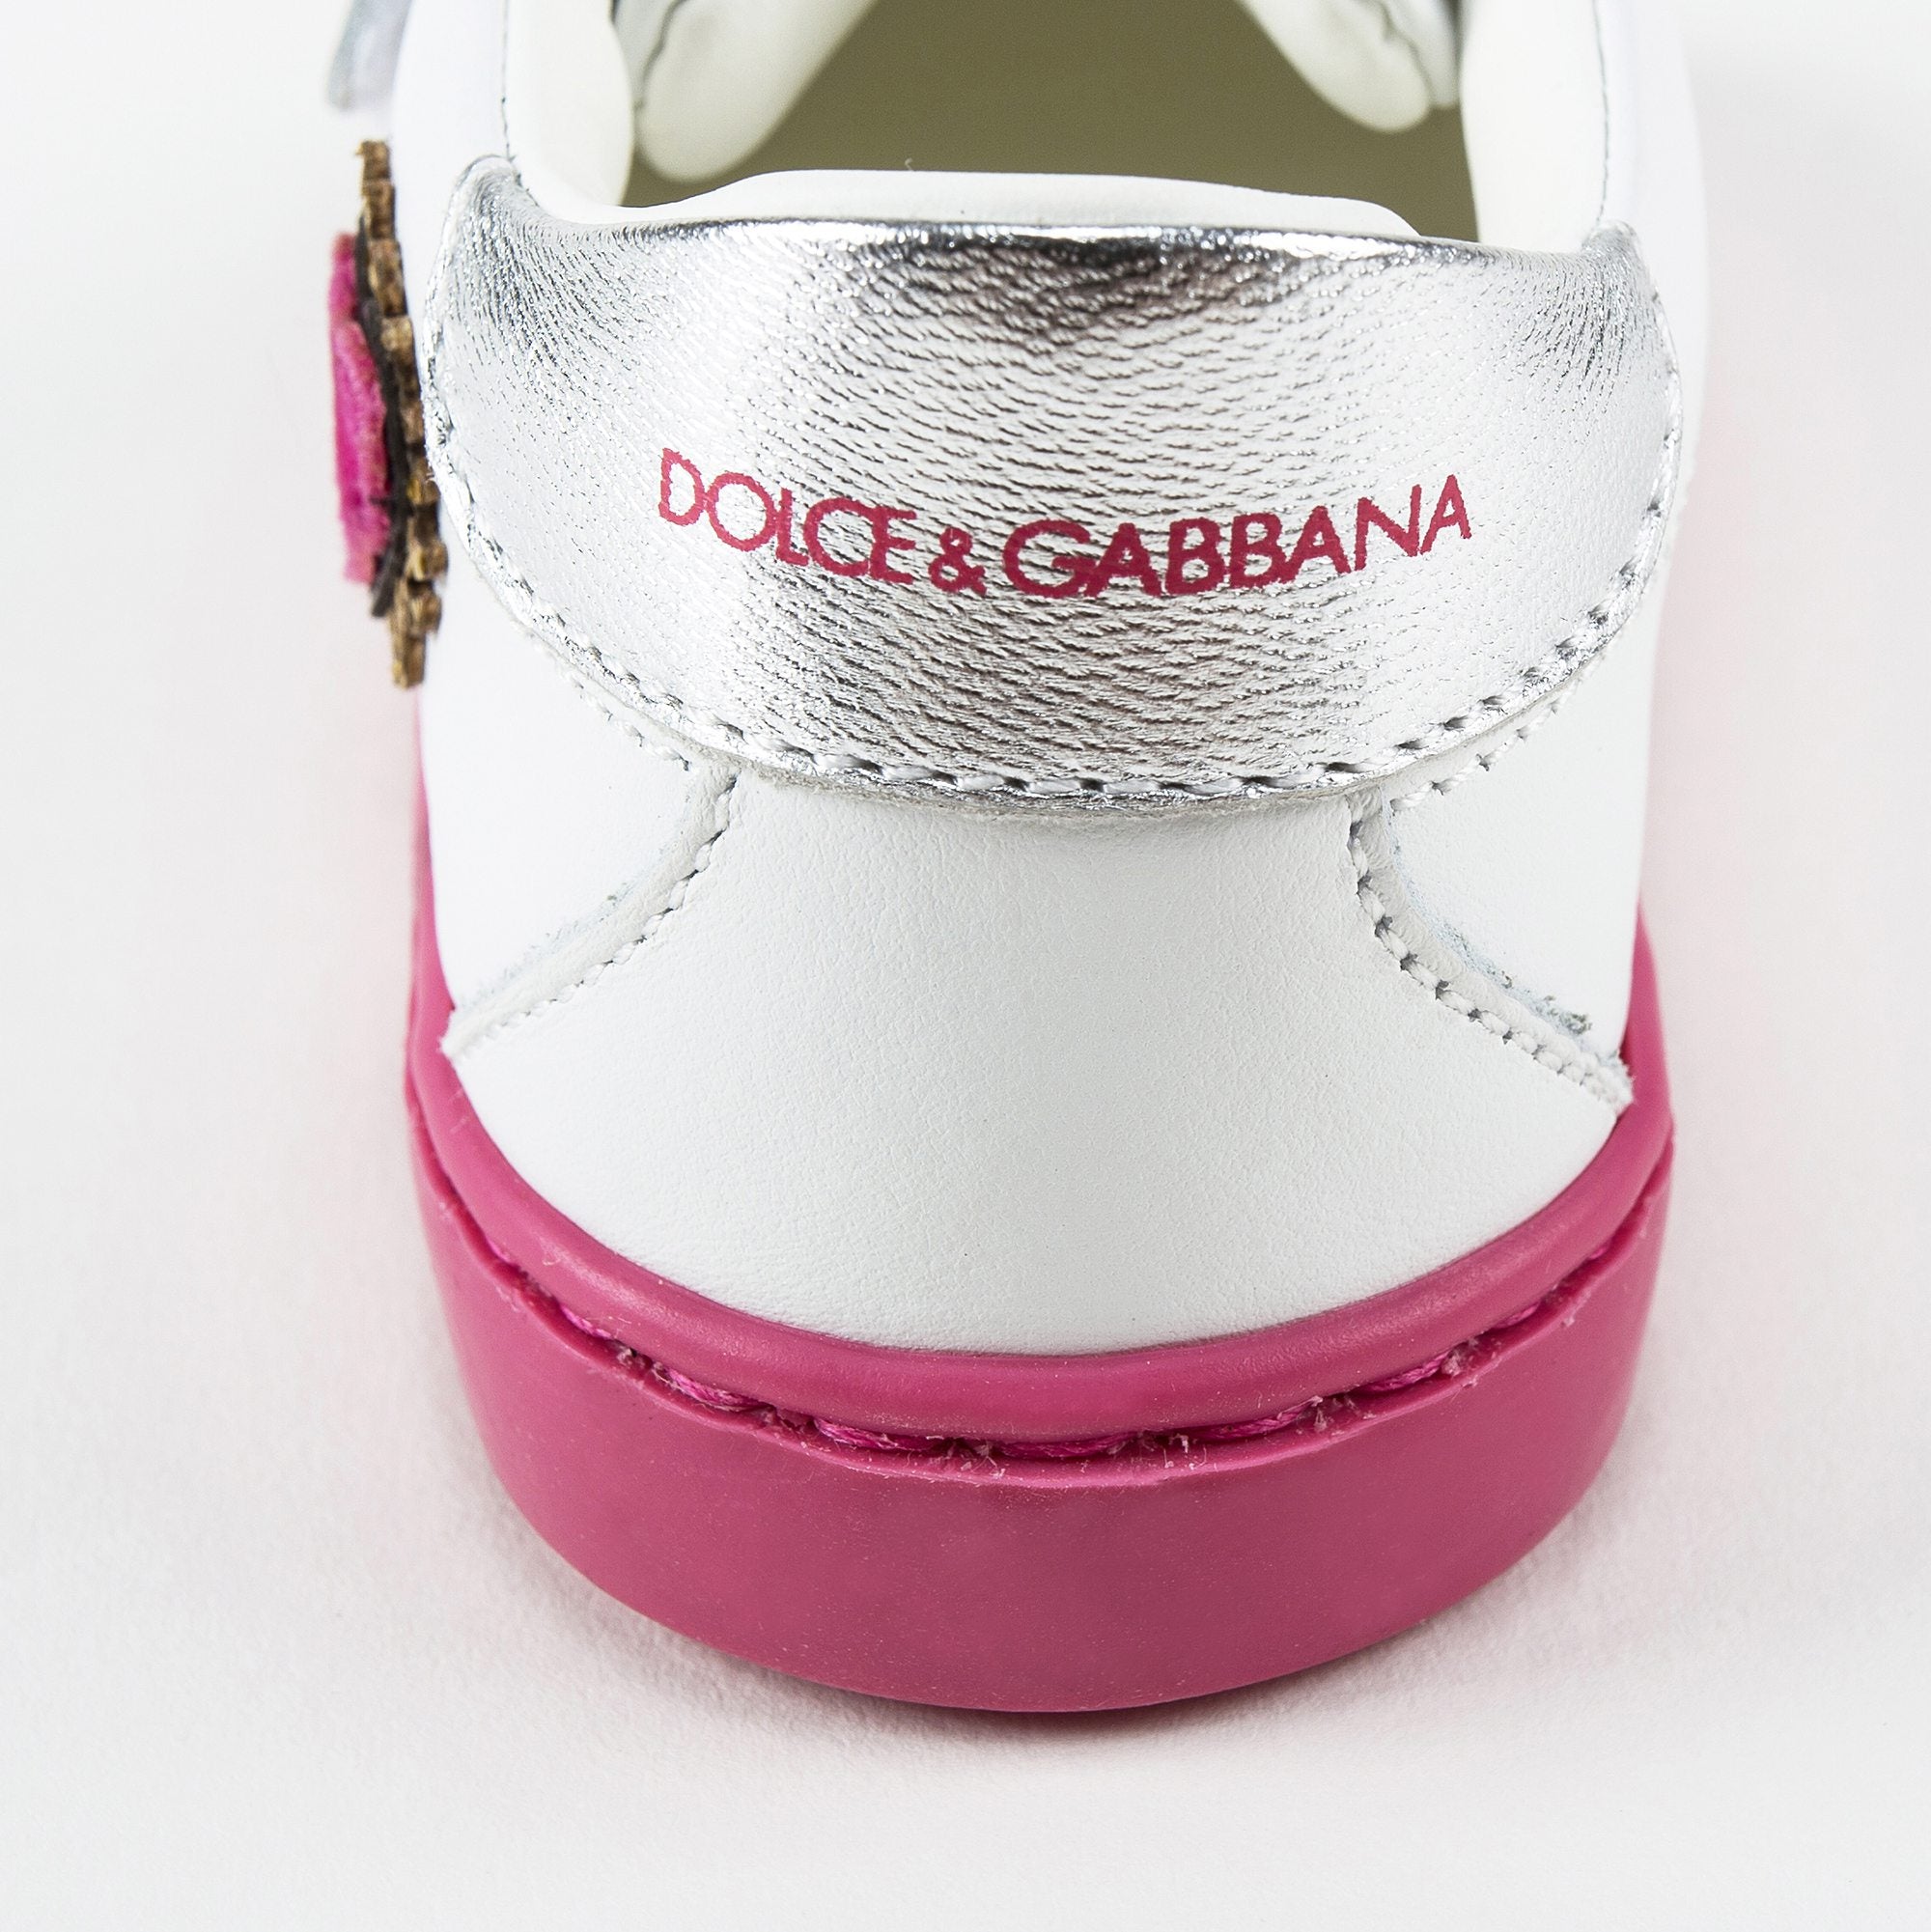 Baby Girls White Leather  "Love" Shoes